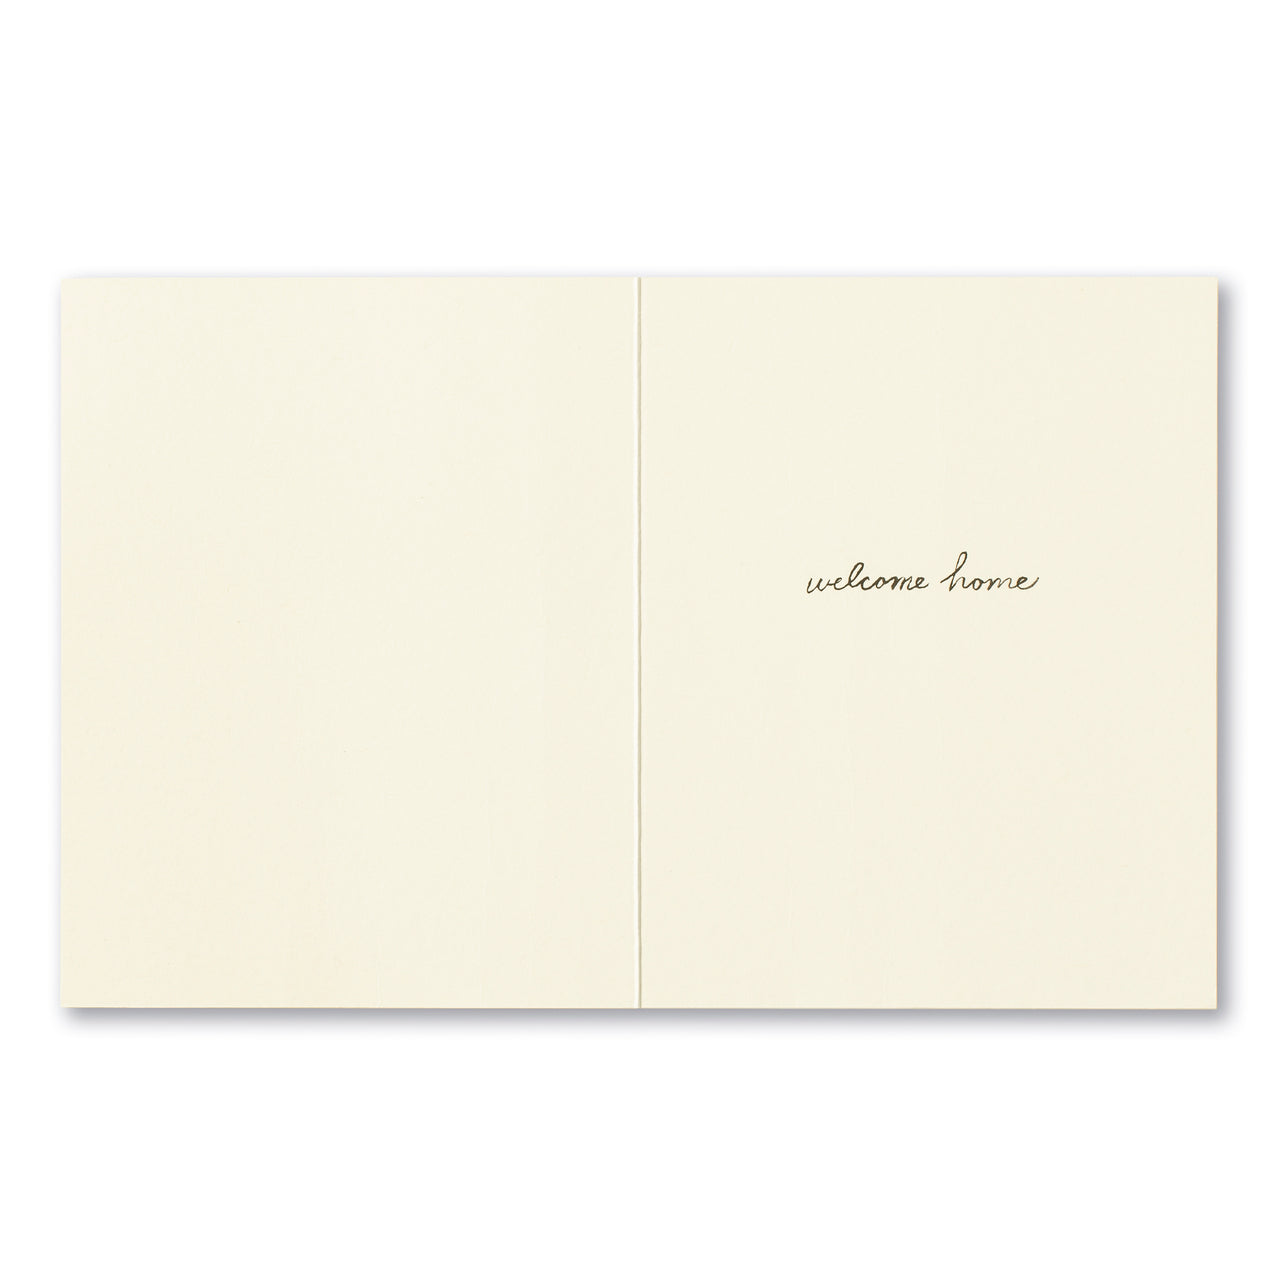 inside card is cream with black script text